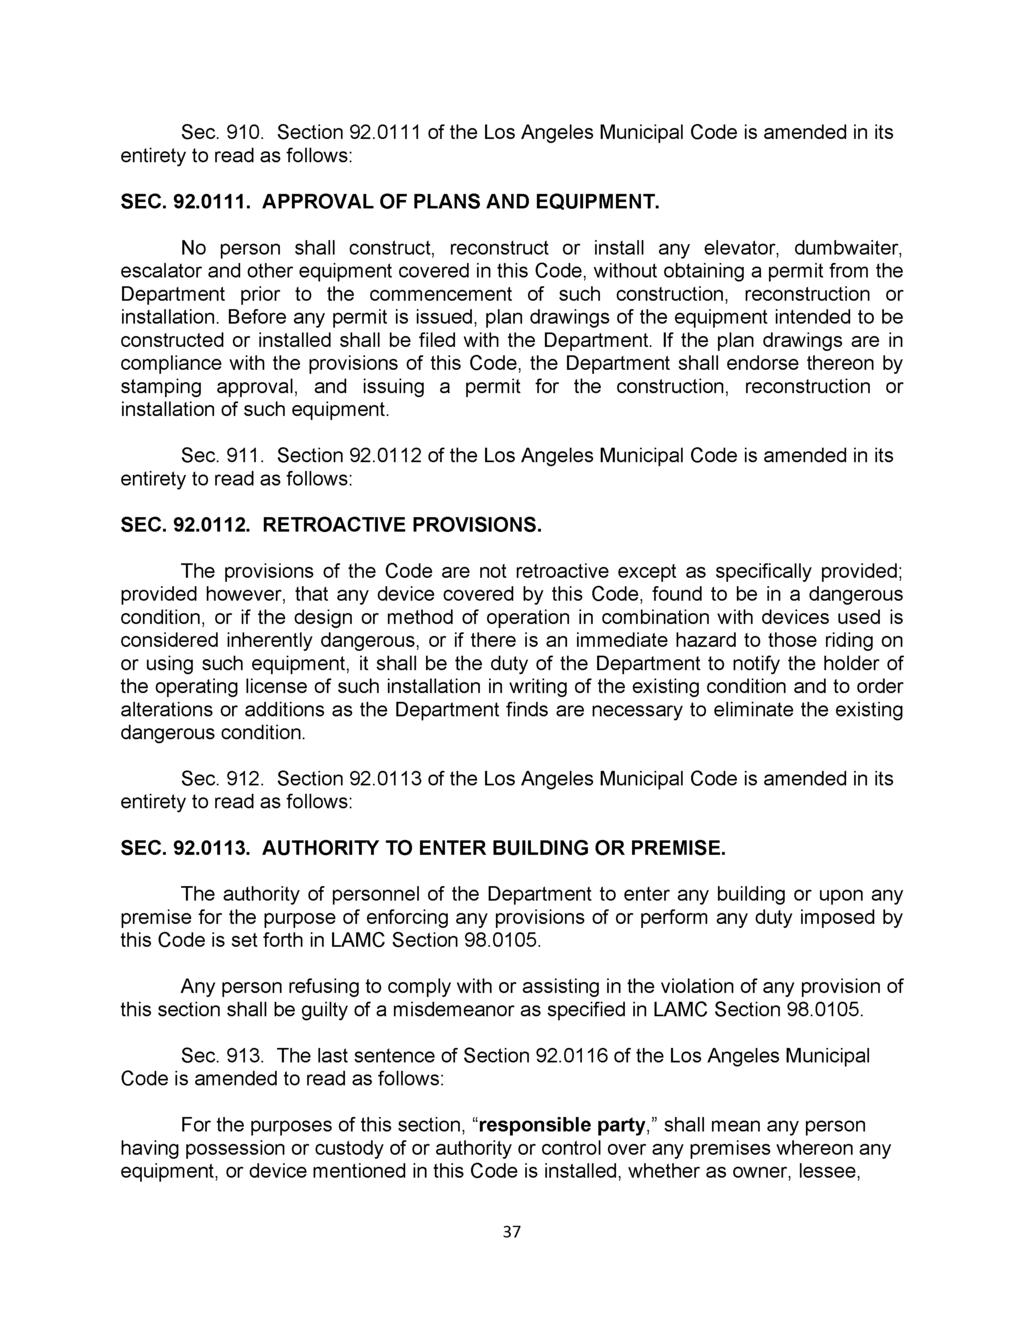 Sec. 910. Section 92.0111 of the Los Angeles Municipal Code is amended in its entirety to read as follows: SEC. 92.0111. APPROVAL OF PLANS AND EQUIPMENT.